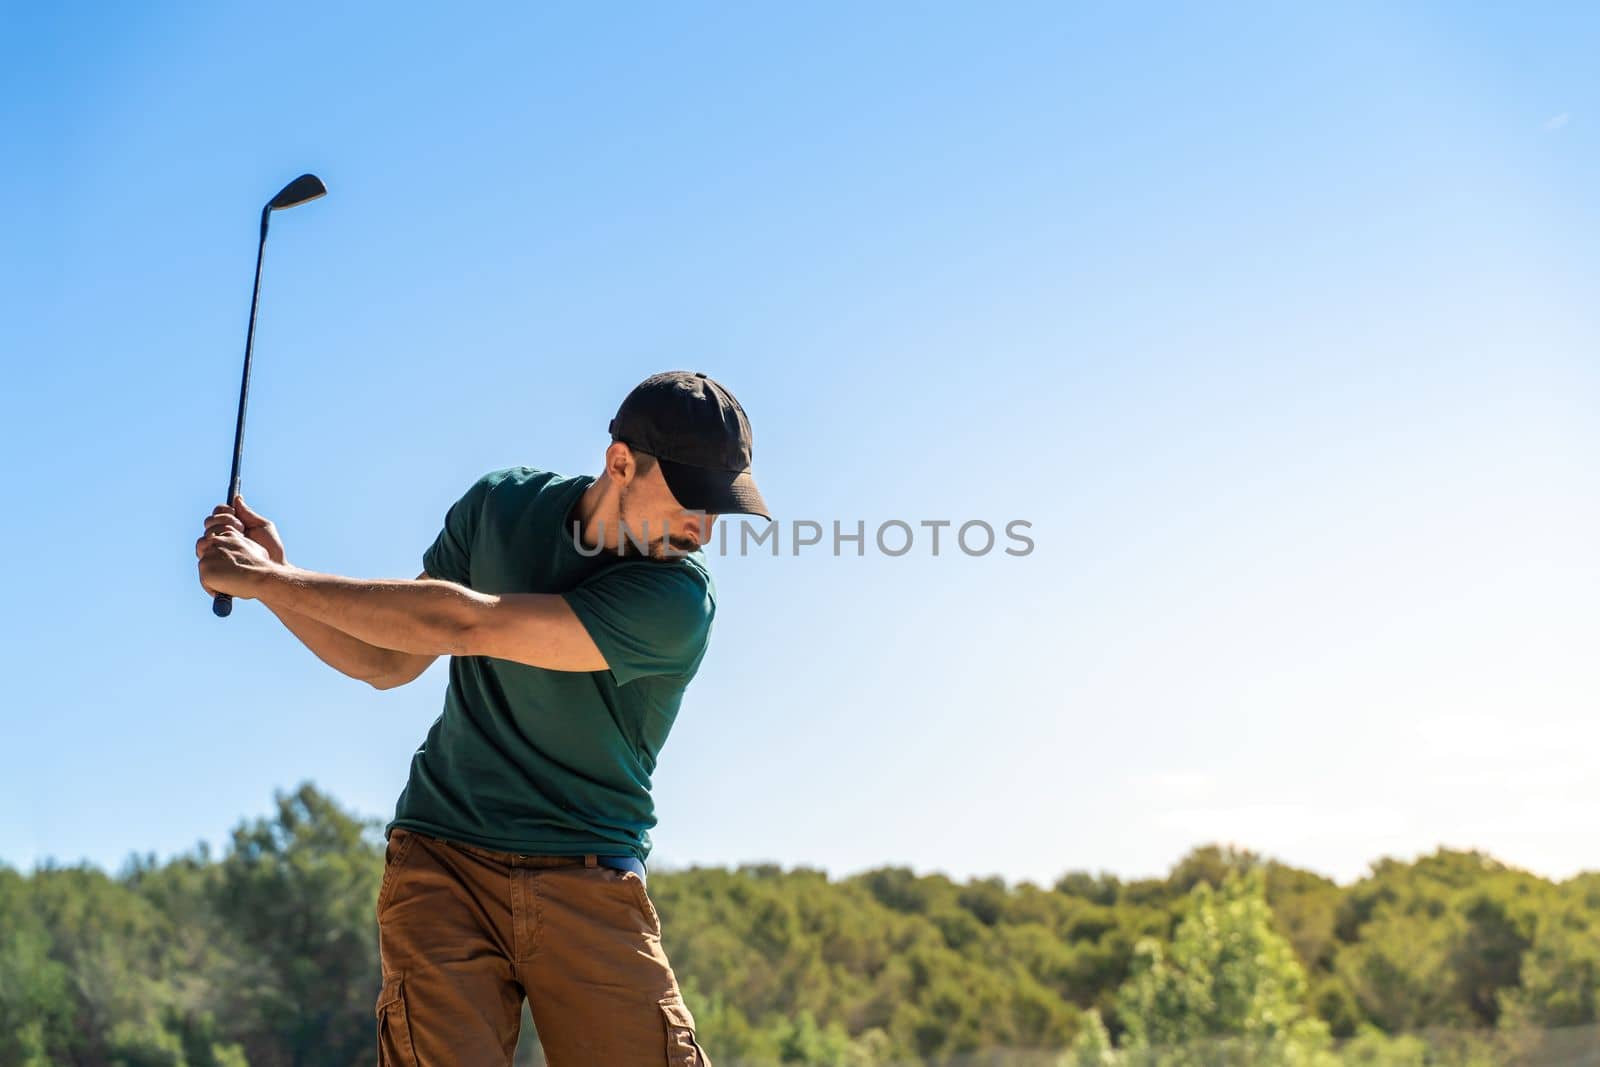 Young man playing golf in summer. Lifestyle game. Healthy and sporty outdoors. Concentration skills concept. by PaulCarr